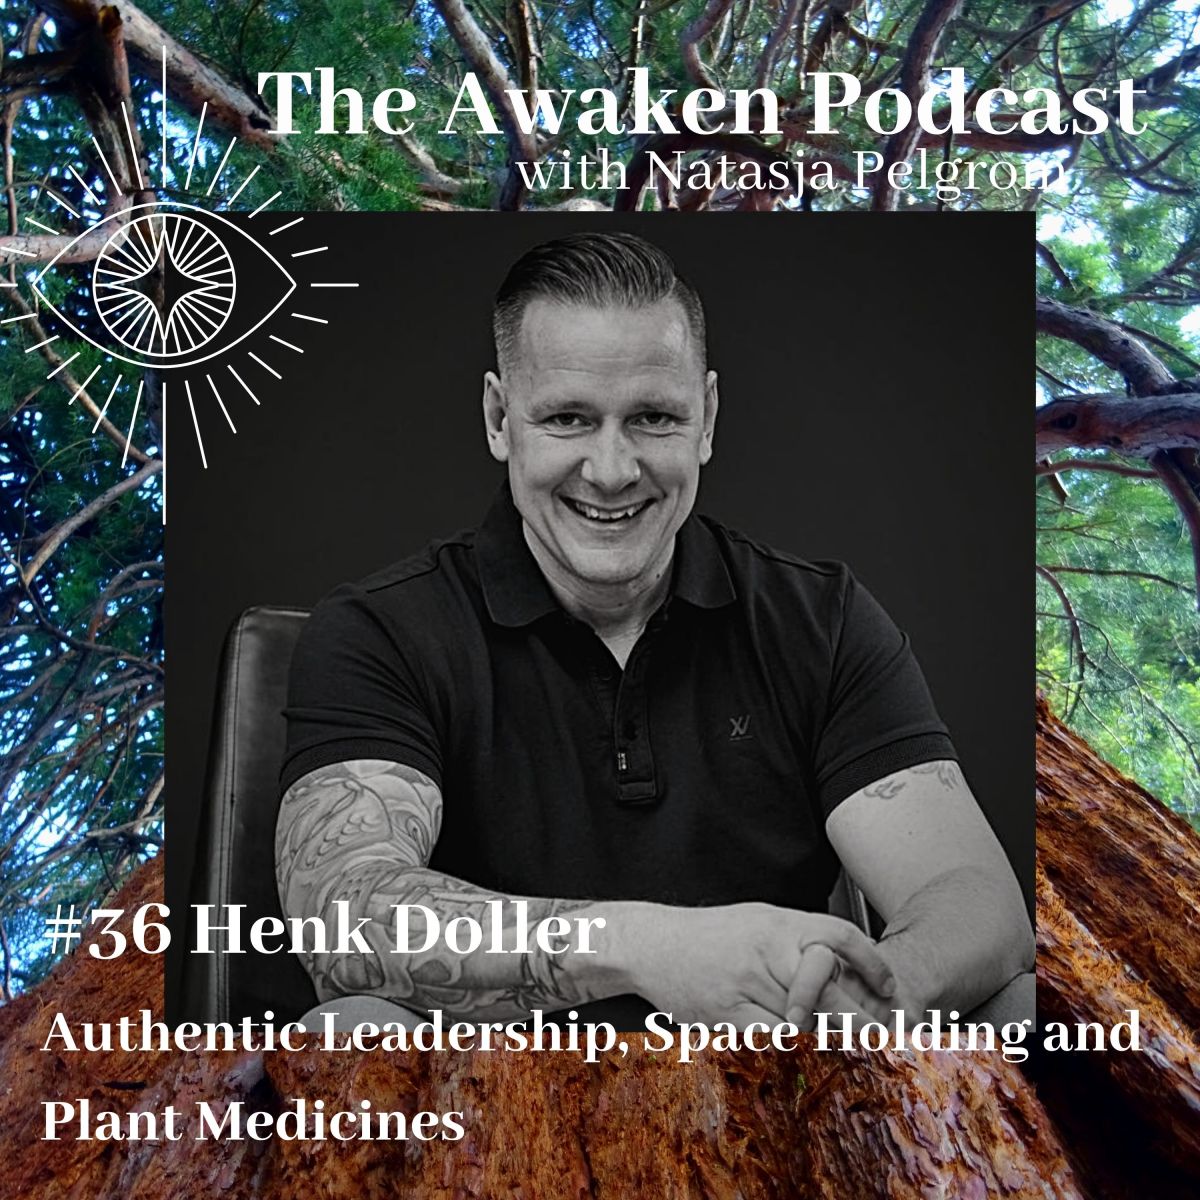 Natasja with Henk Doller on Authentic Leadership, Space Holding and Plant Medicines